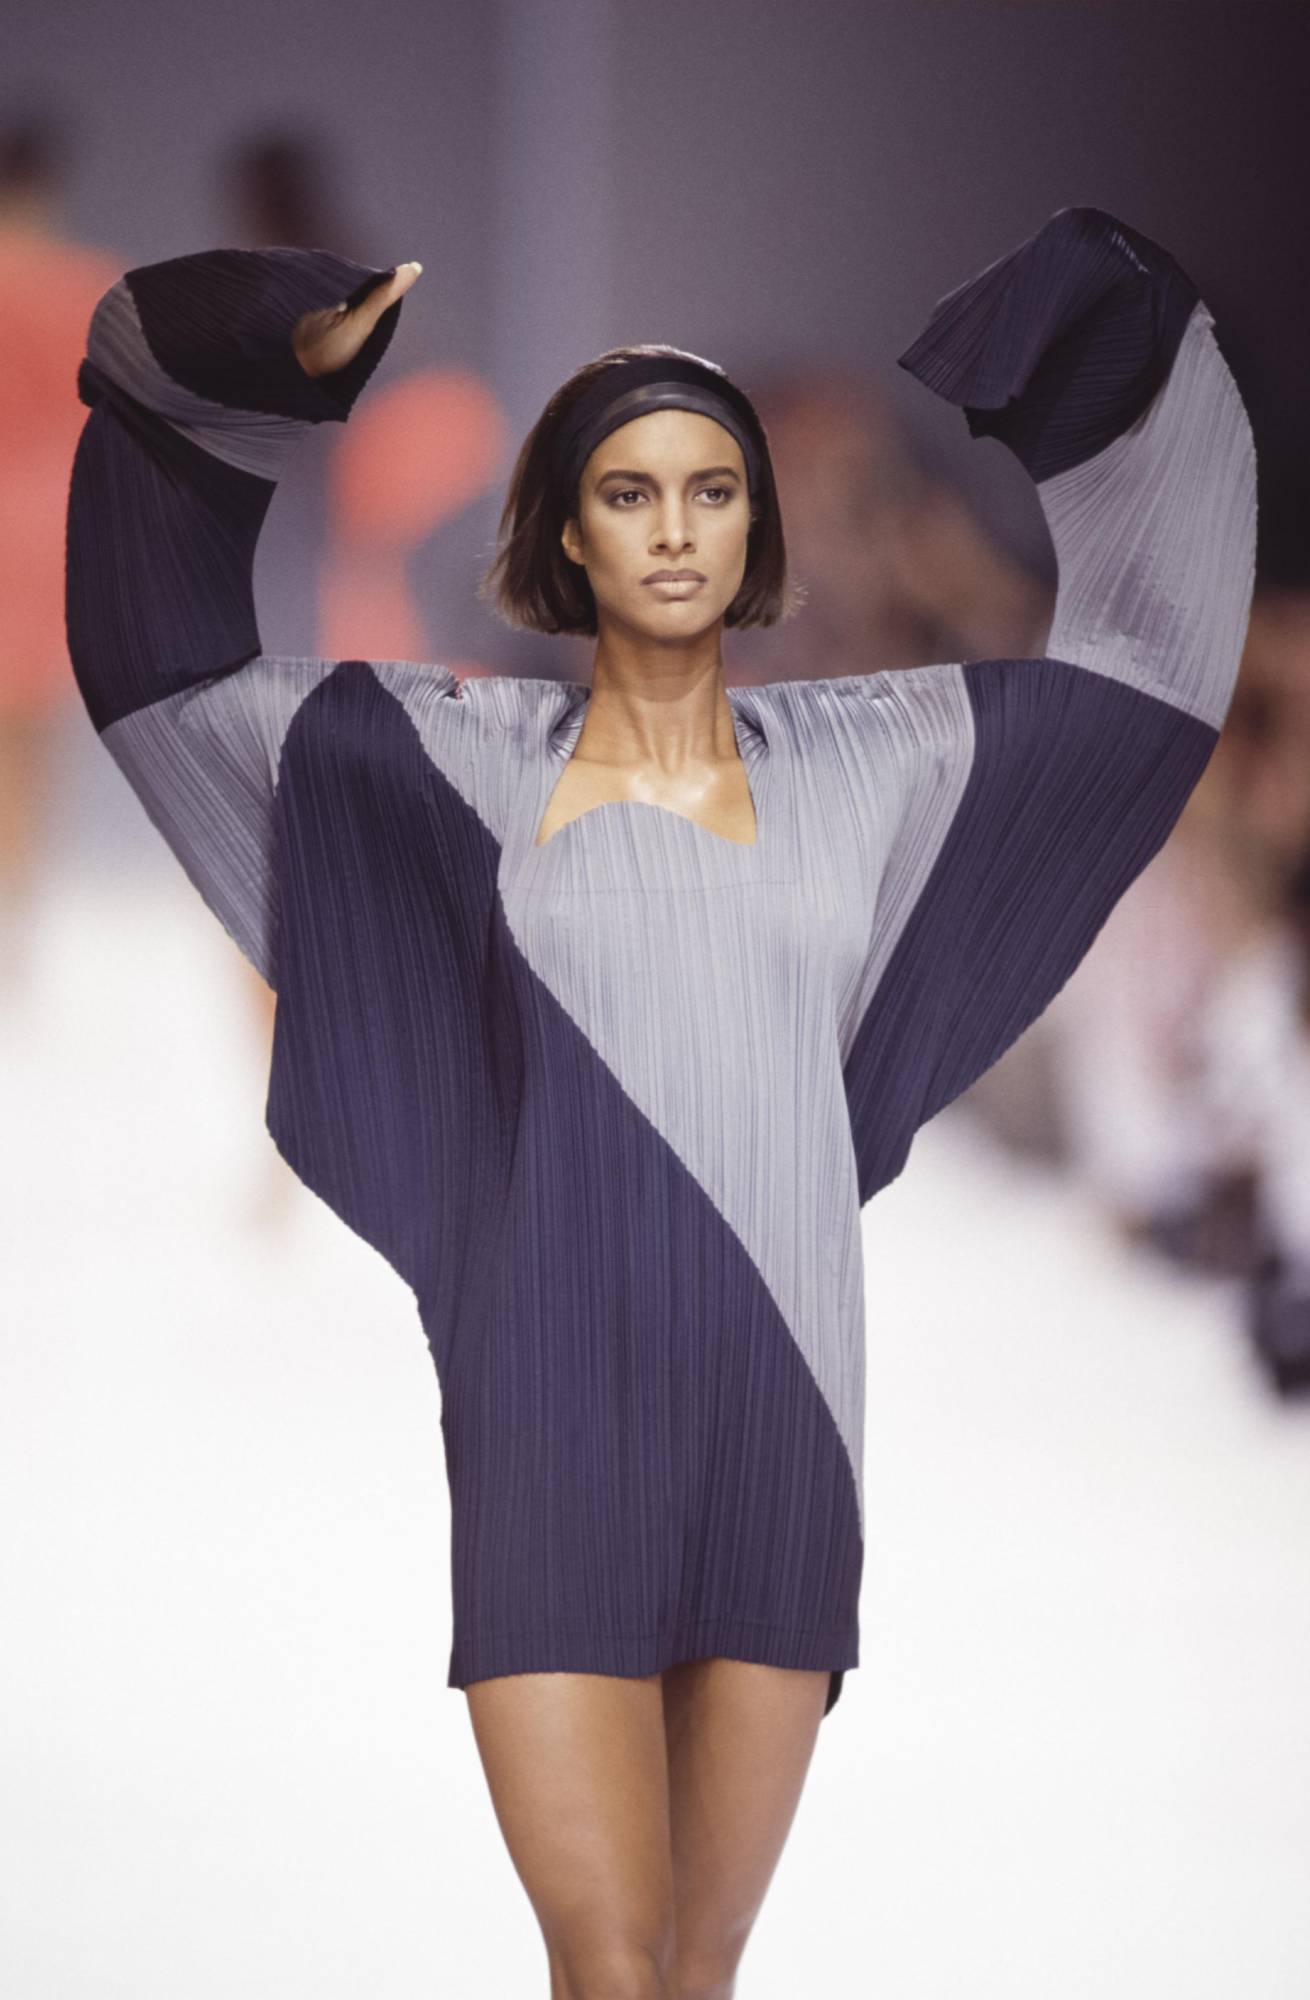 Issey Miyake- Tech Influence over Generations